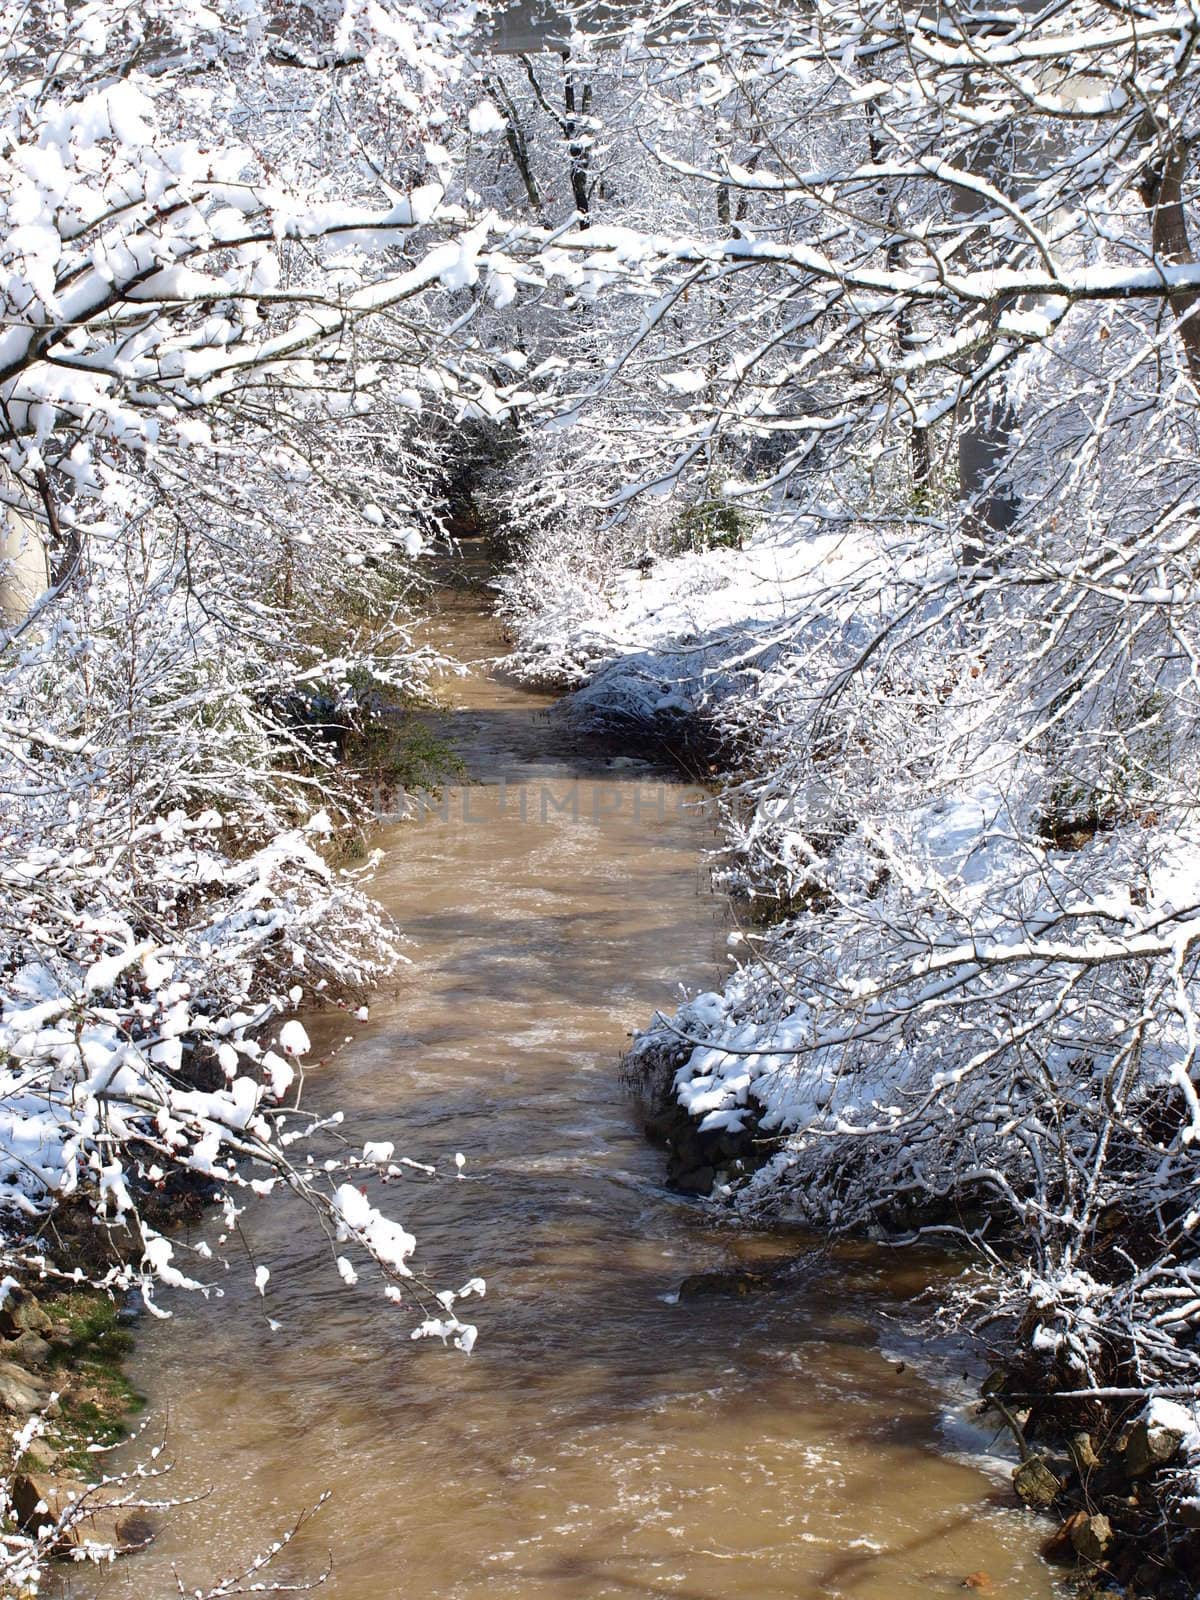 A cold winter creek after the storm